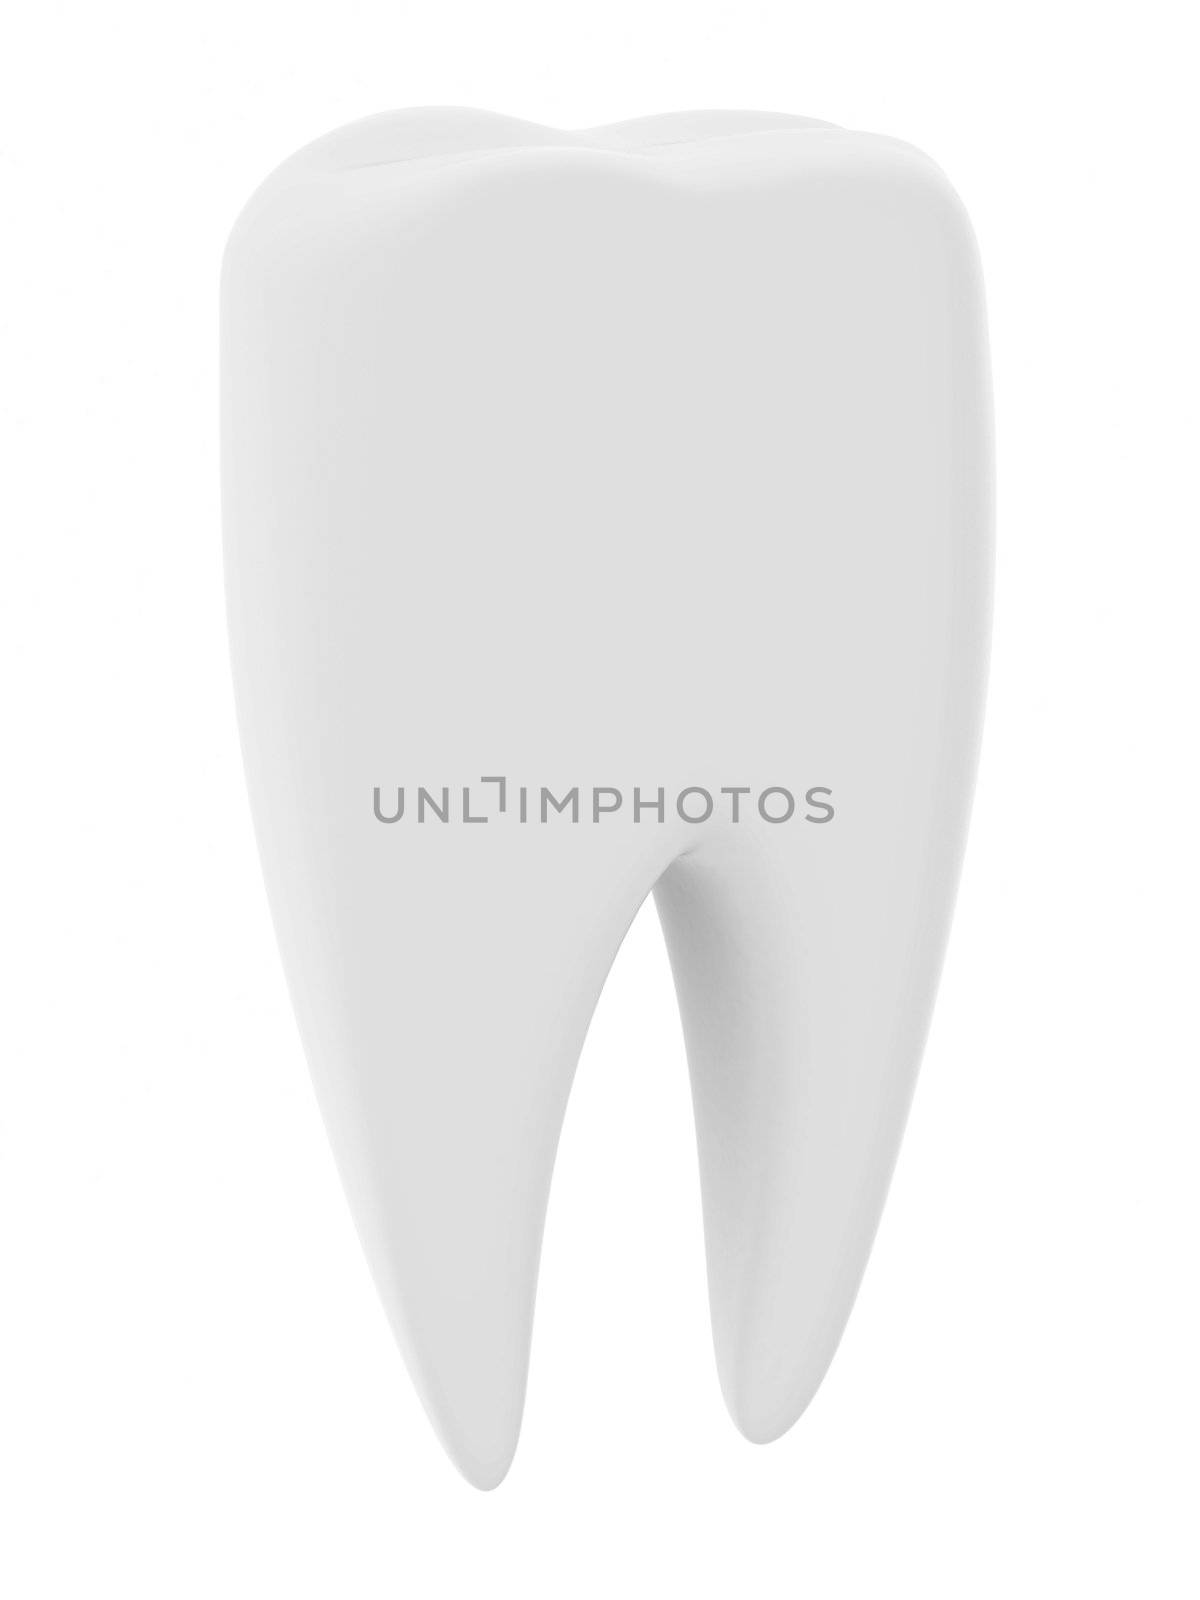 Tooth isolated on white by oneo